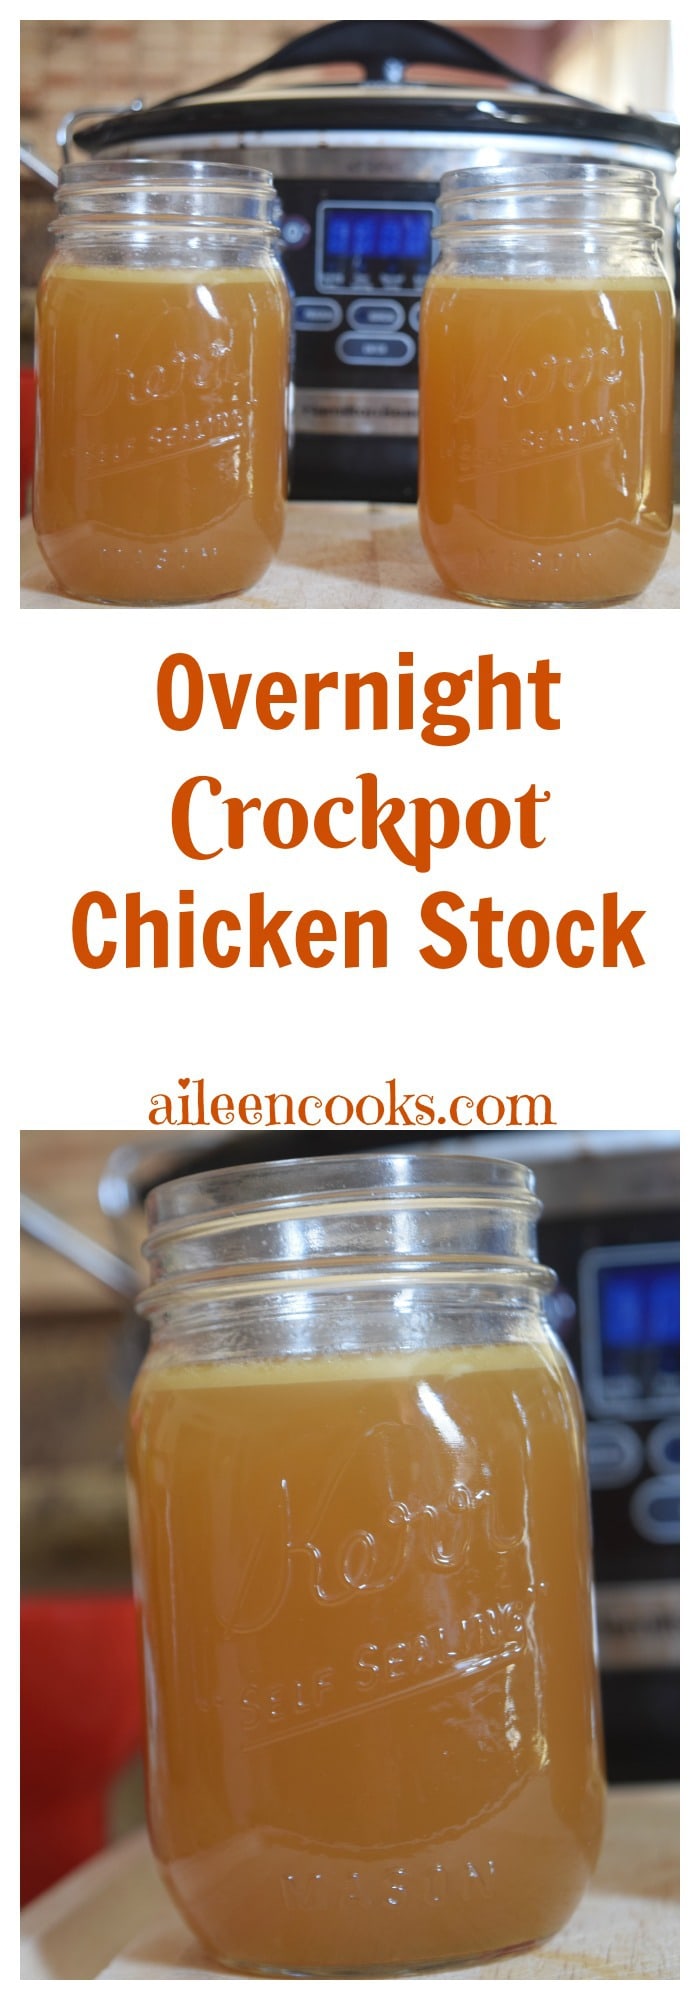 A frugal and healthy recipe for crockpot chicken stock cooked overnight while you sleep. Slow Cooker Chicken Broth recipe from aileencooks.com.